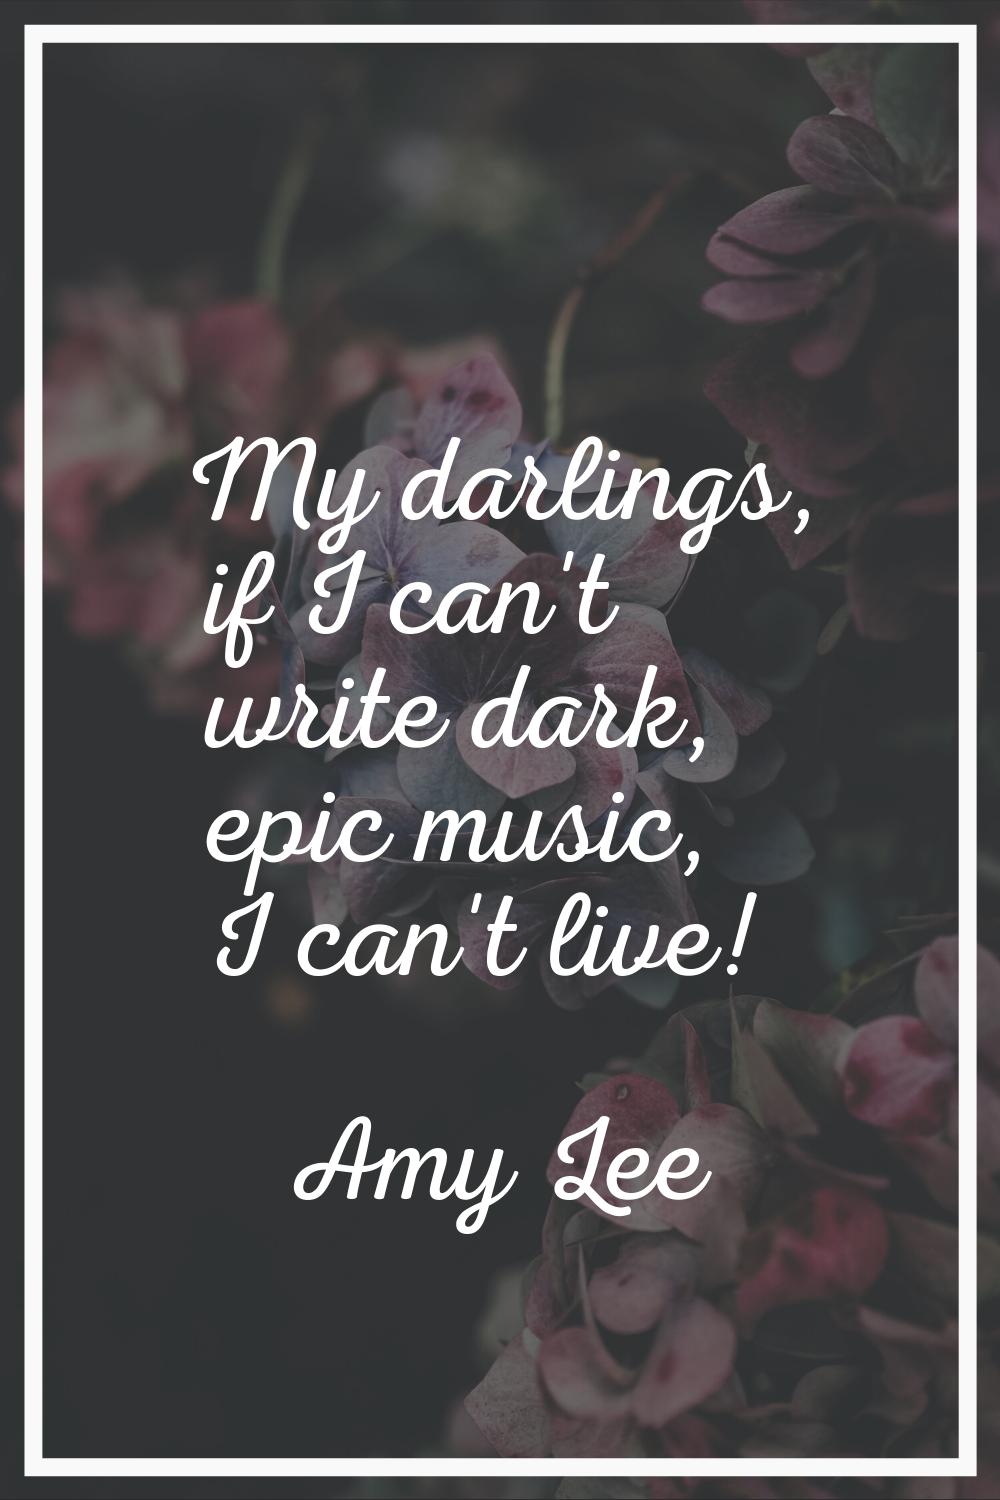 My darlings, if I can't write dark, epic music, I can't live!